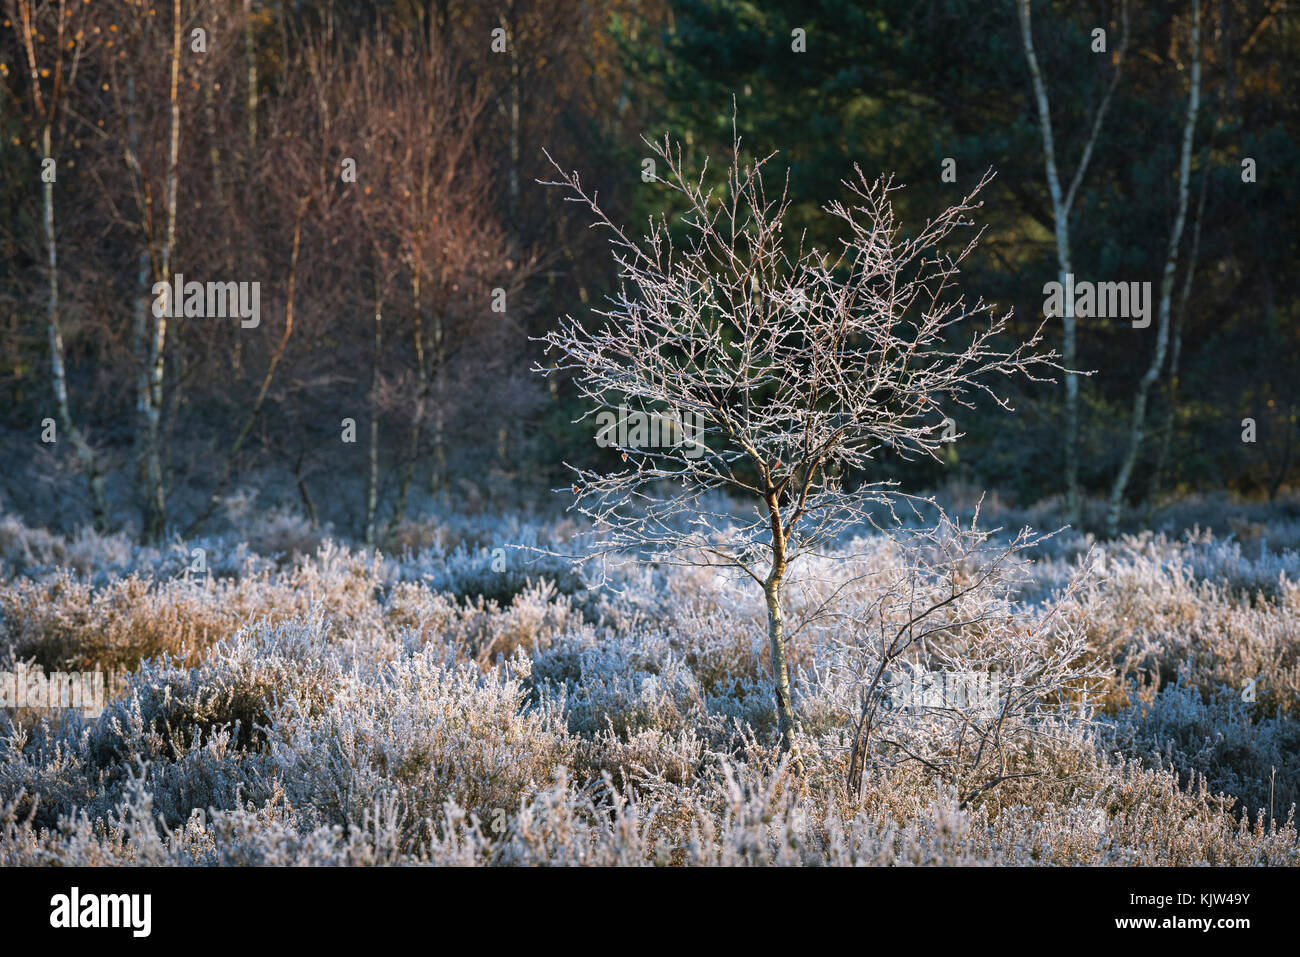 A small Silver Birch sapling covered in hoar frost on a cold November morning on Frensham Common in Surrey, England. Stock Photo